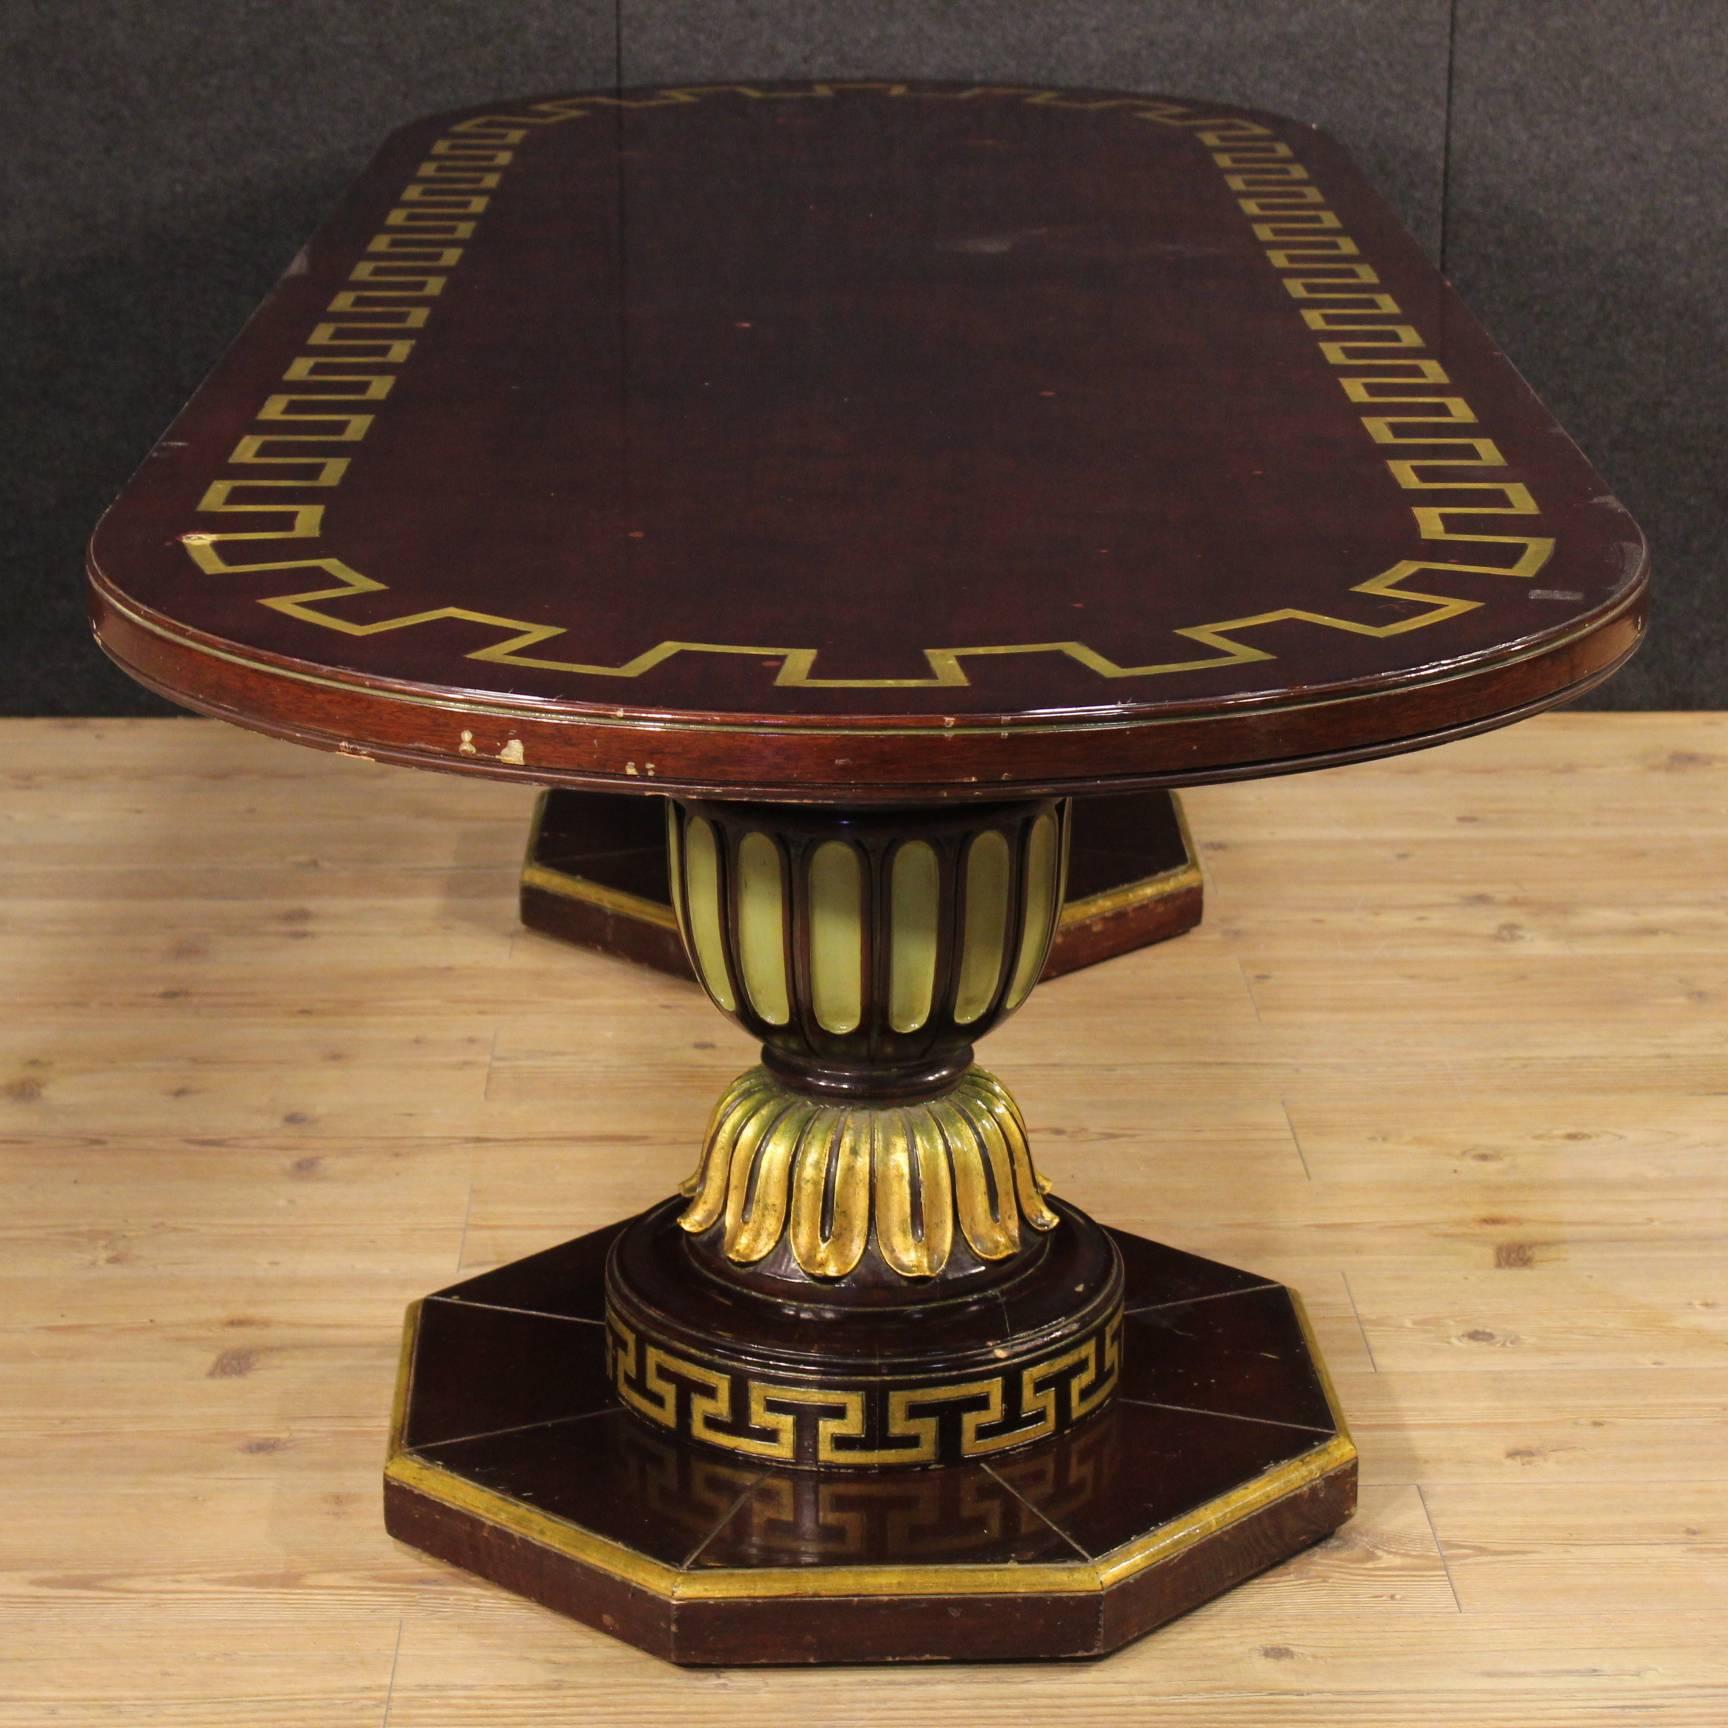 Great Spanish table of the mid-20th century. Furniture made by ornately carved, lacquered, gilded and painted wood of beautiful decoration. Table of great size and exceptional service ideal to be included in a salon. Furniture consists of two wooden